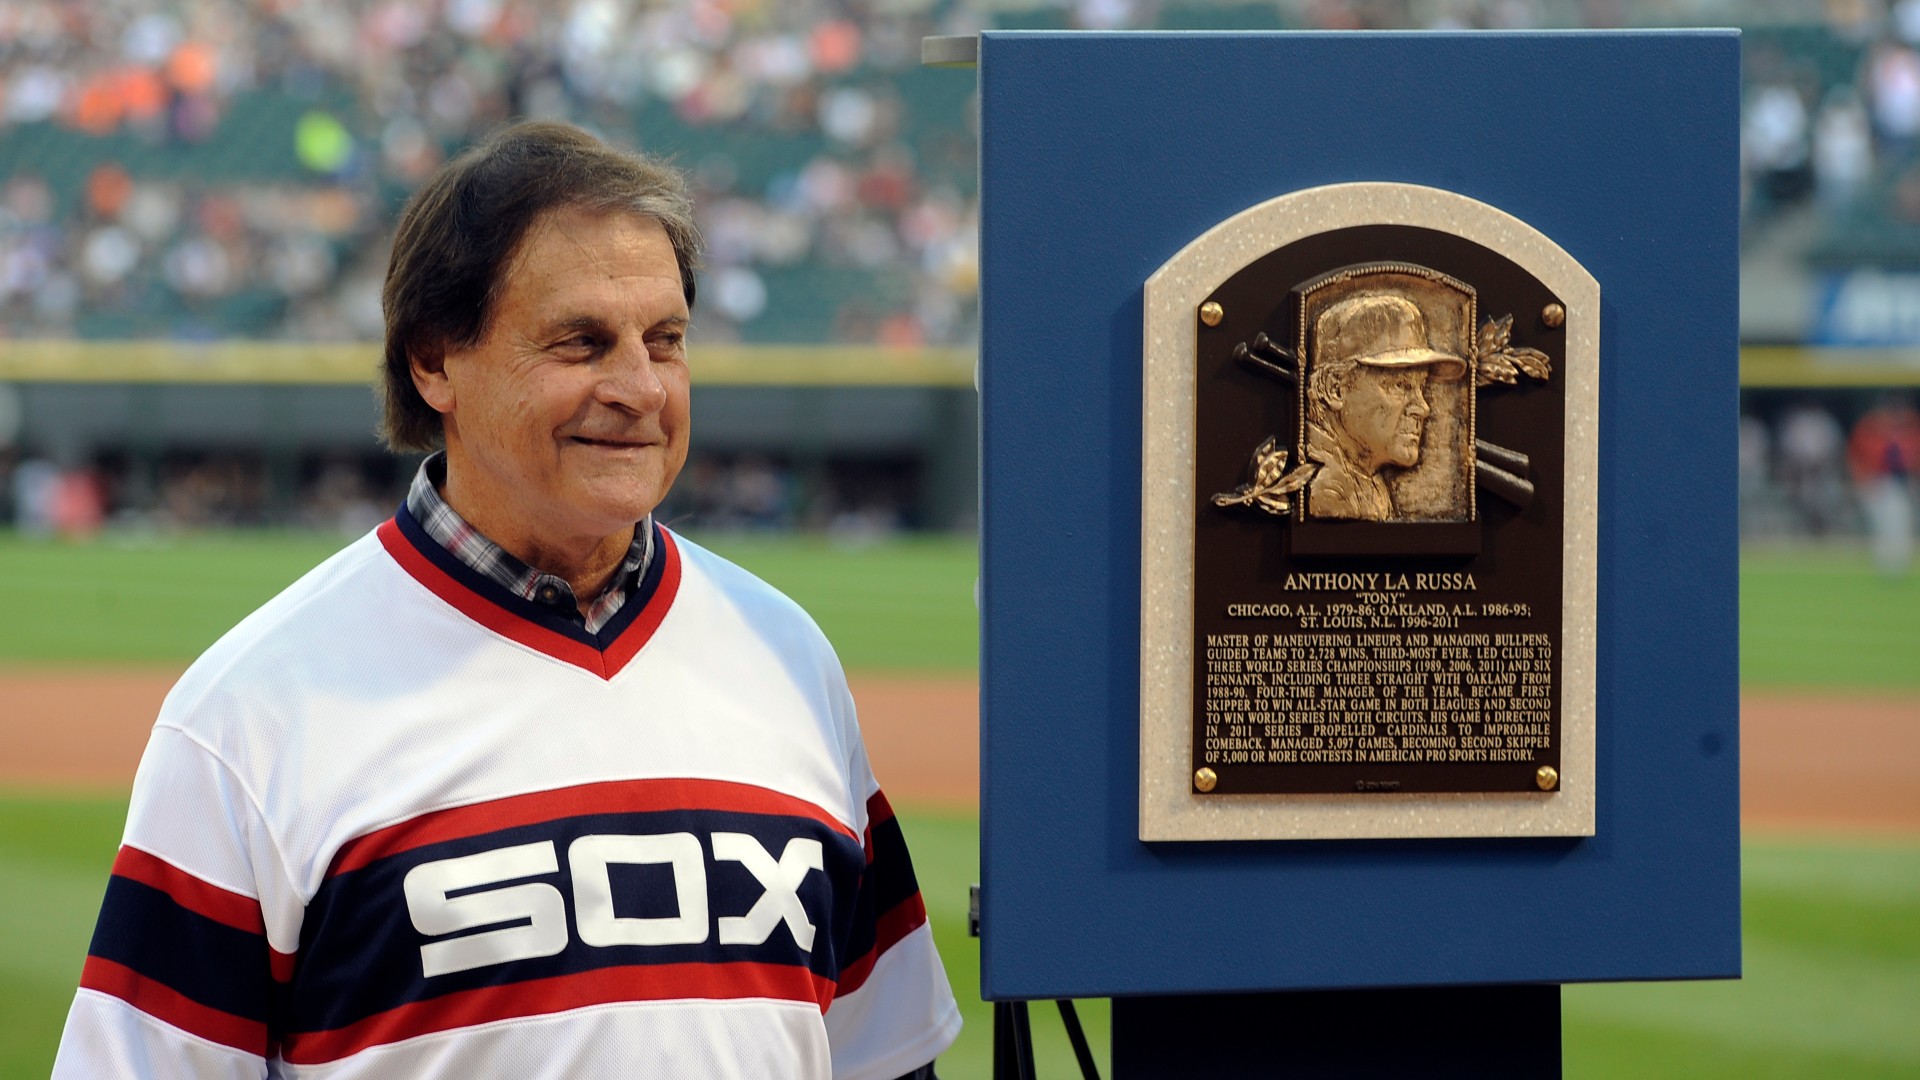 White Sox Reunite with La Russa, Hire Hall of Fame Manager